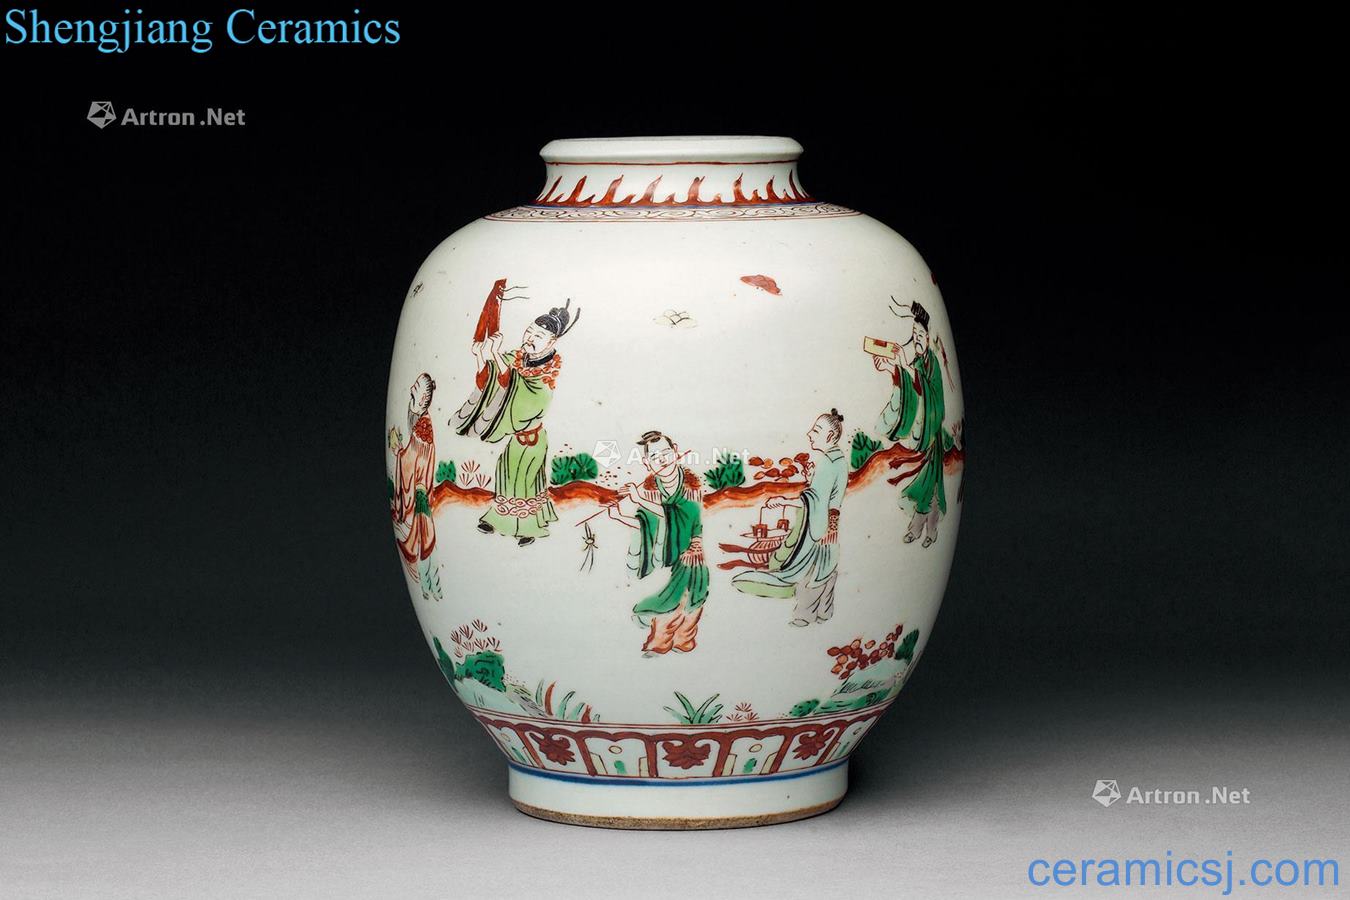 The late Ming dynasty Colorful eight immortals character lines cans